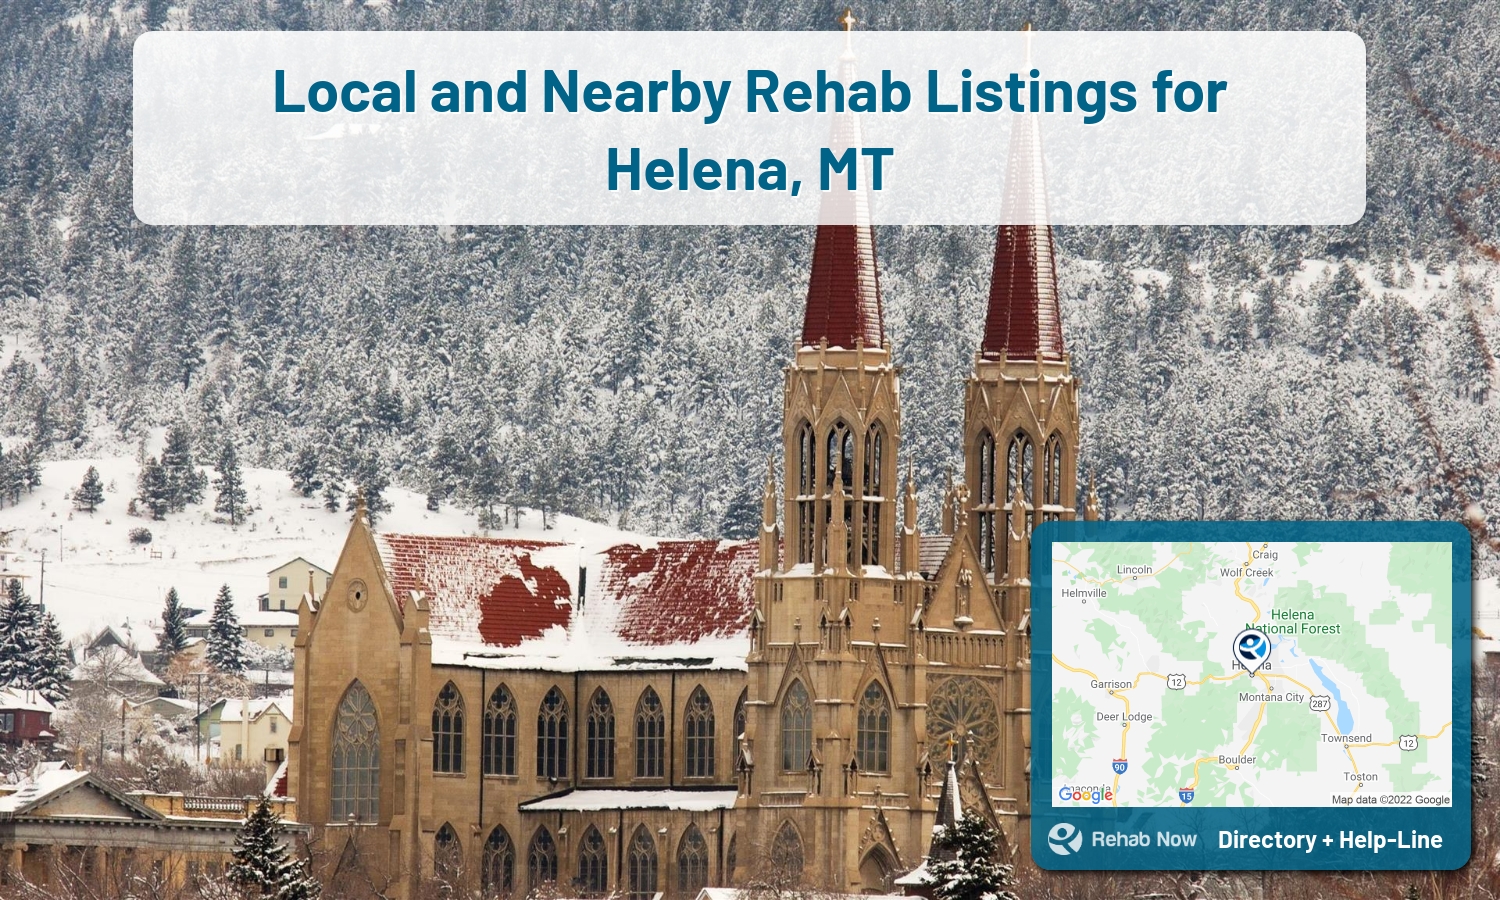 Drug rehab and alcohol treatment services nearby Helena, MT. Need help choosing a treatment program? Call our free hotline!